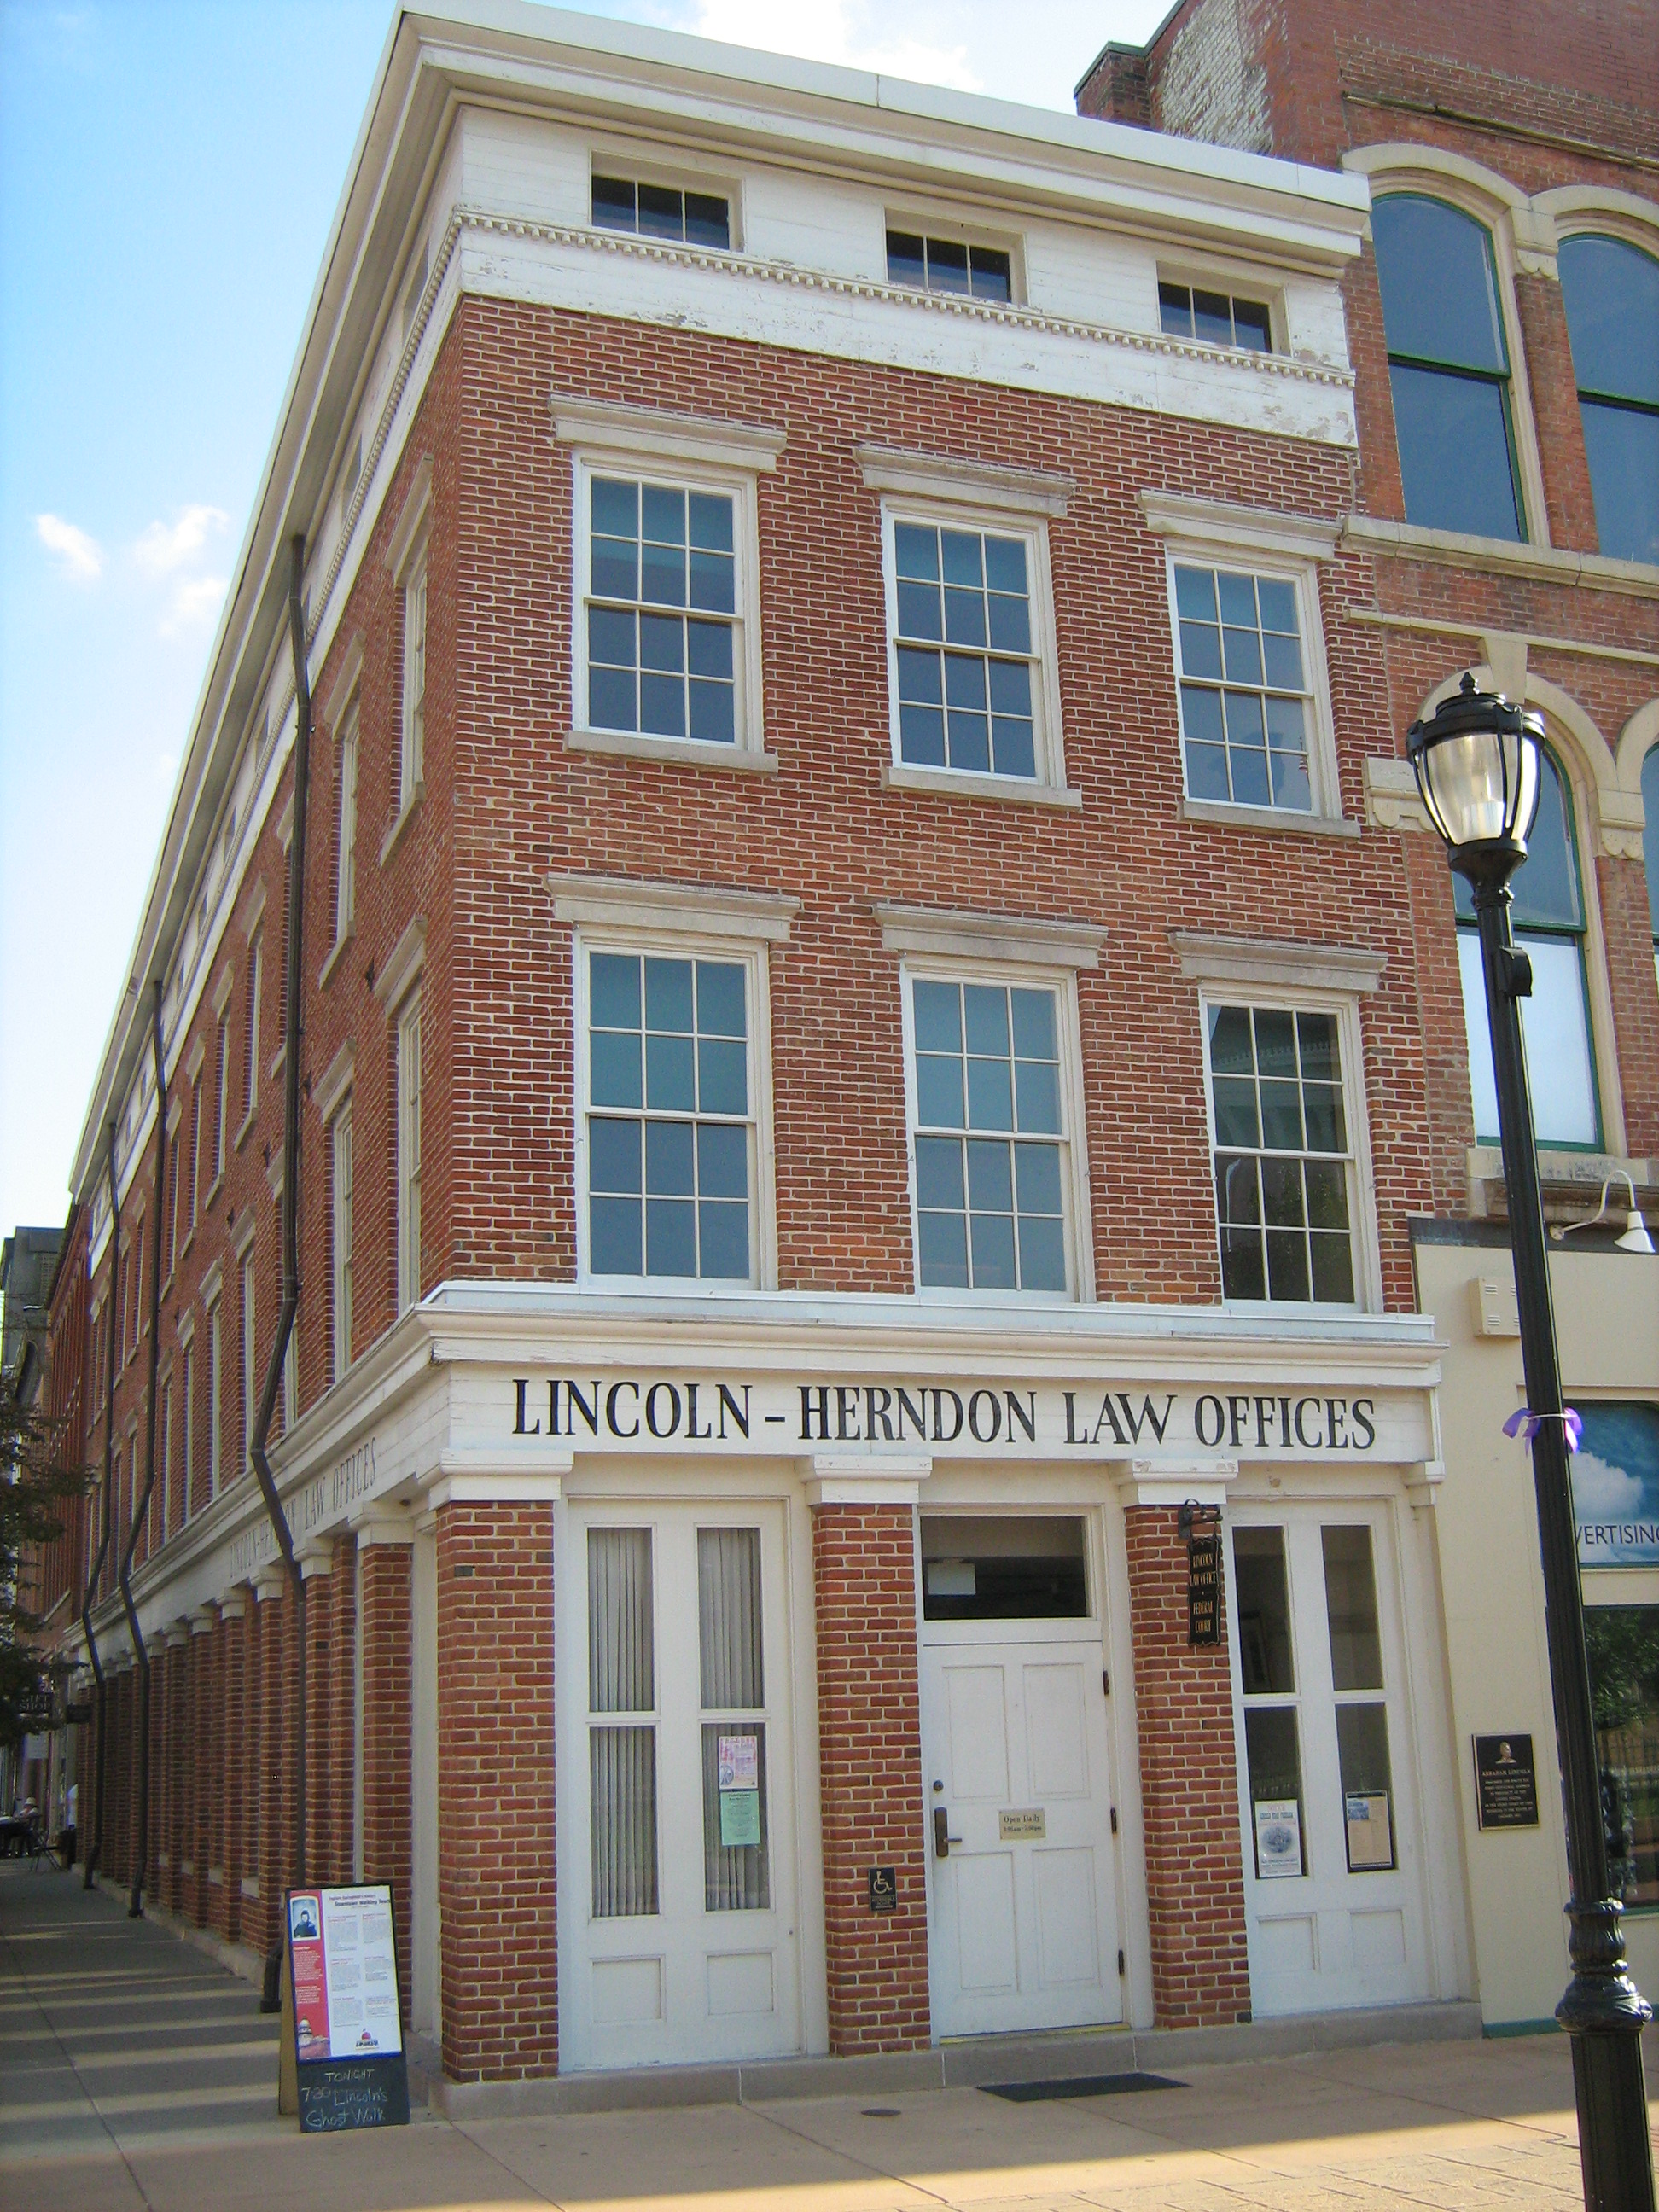 Lincoln-Herndon_Law_Offices_State_Historic_Site.jpg